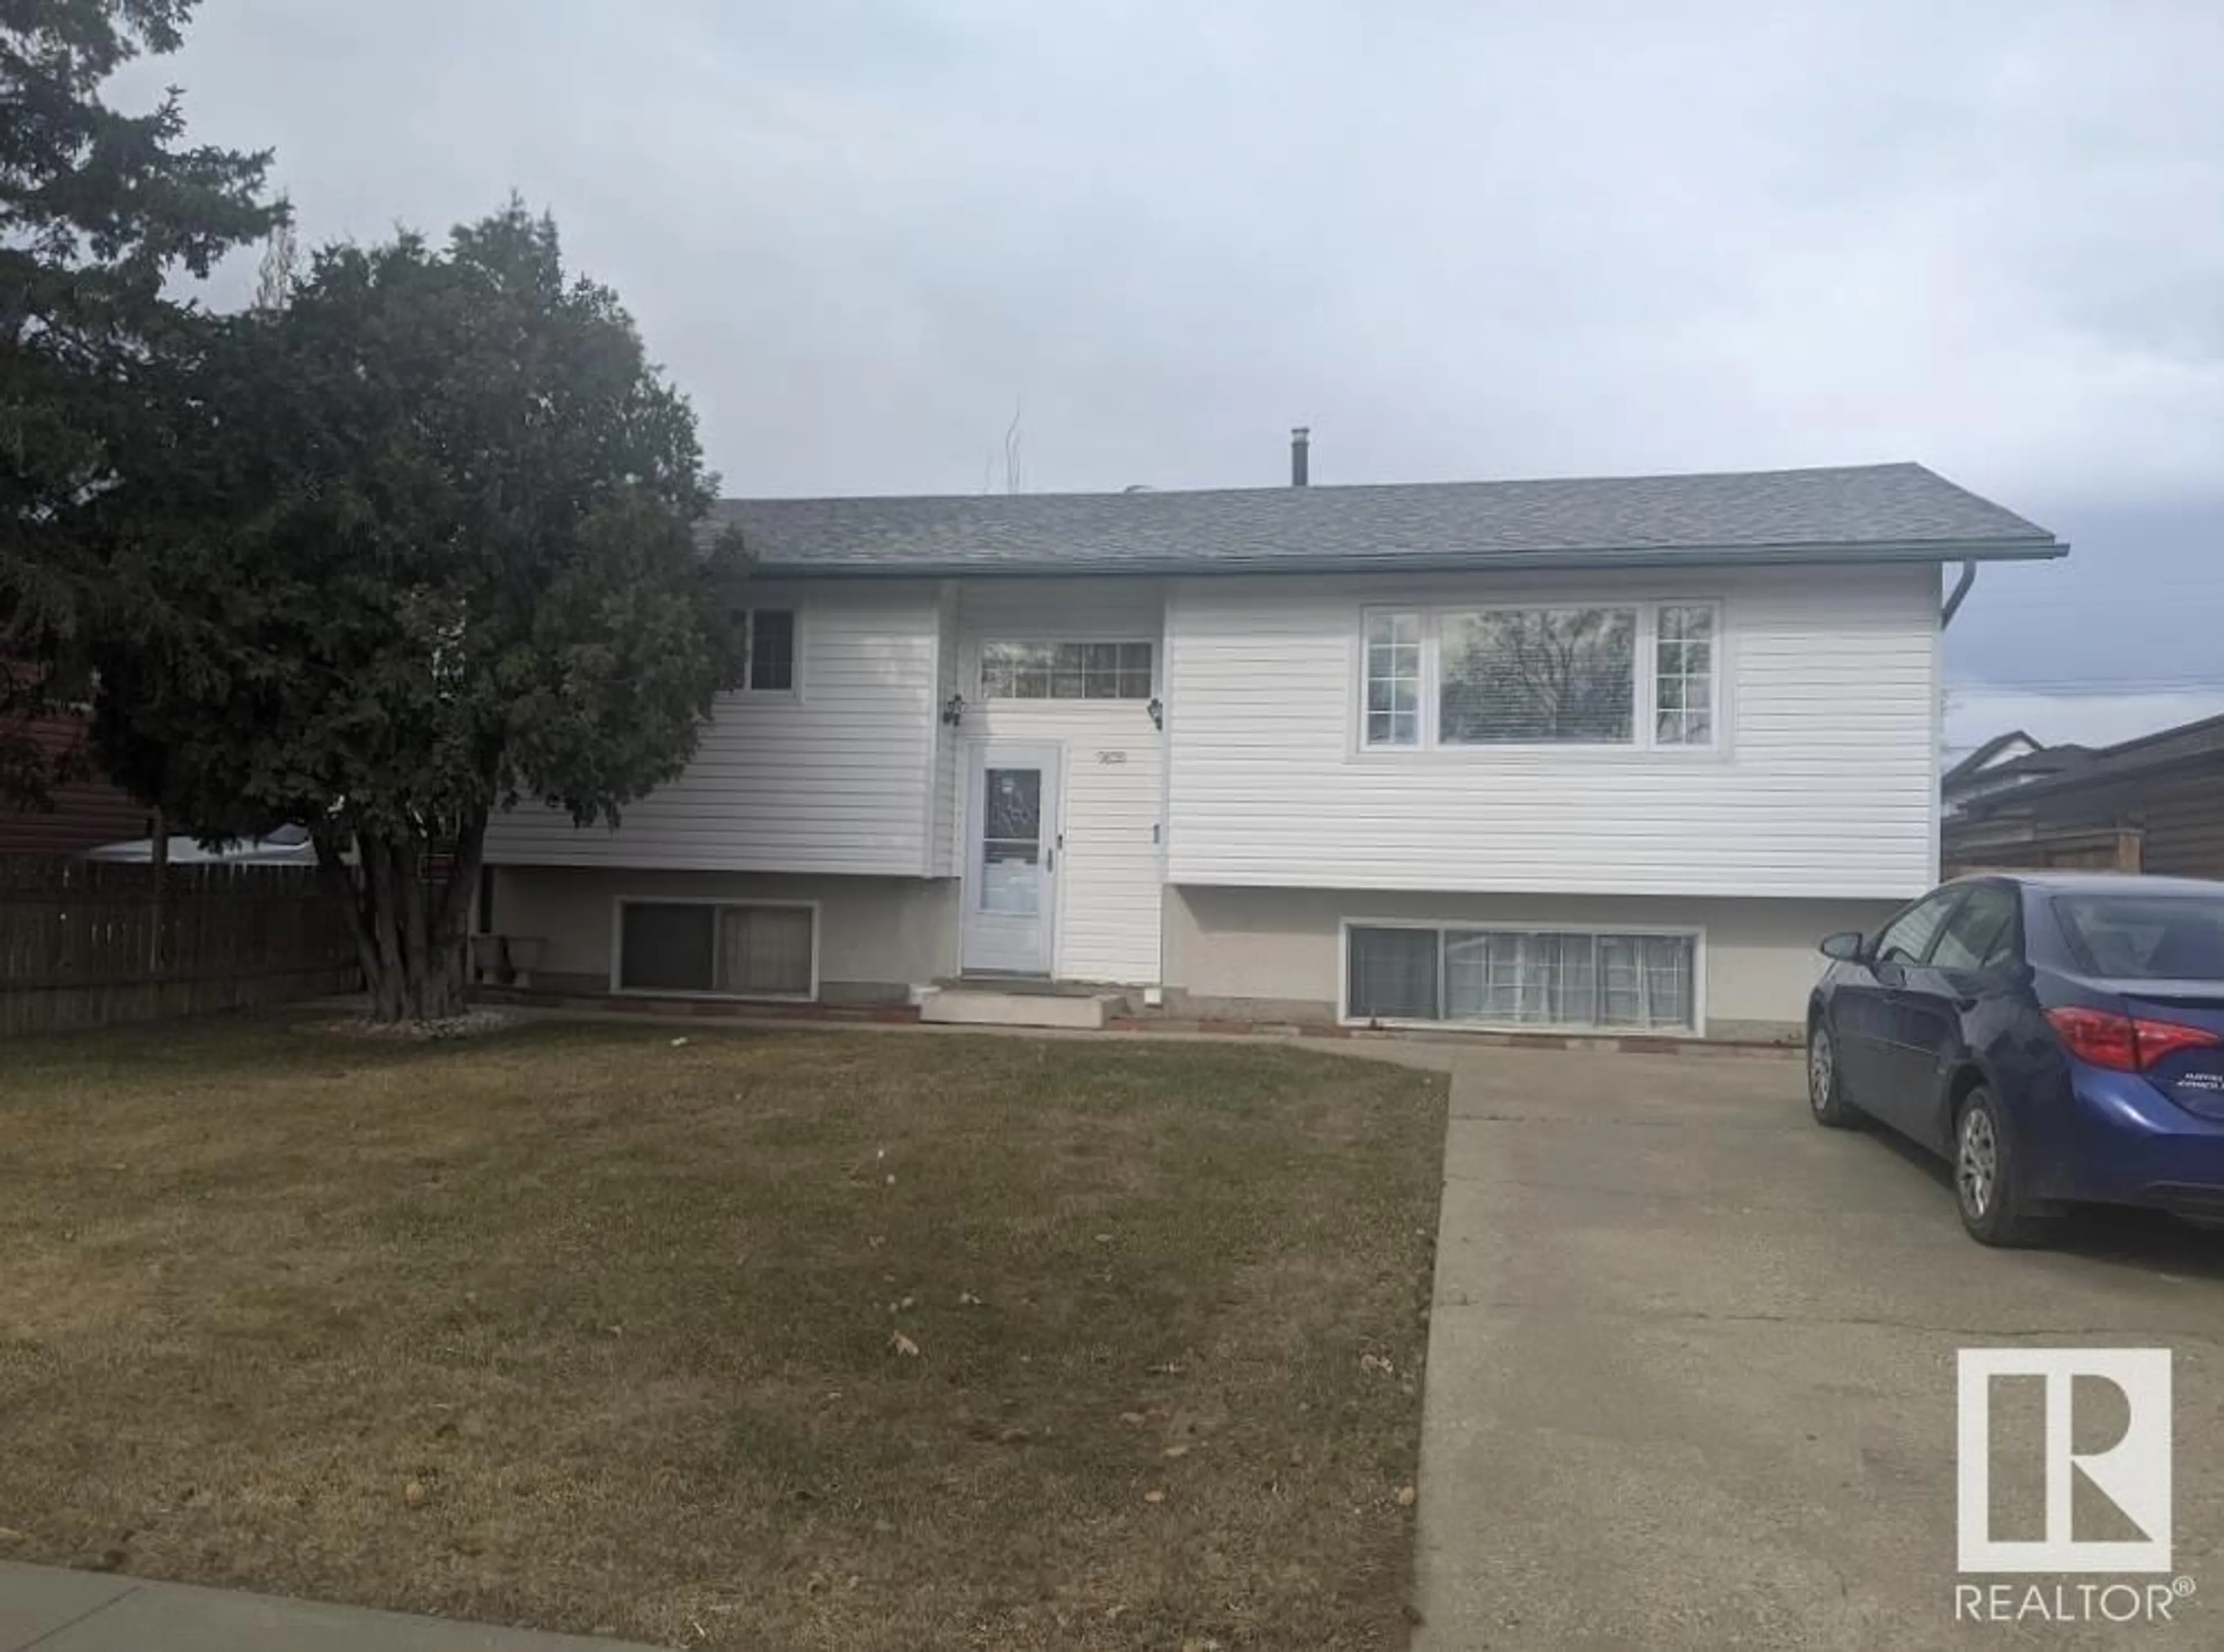 Frontside or backside of a home for 9828 154 ST NW, Edmonton Alberta T5P2G6